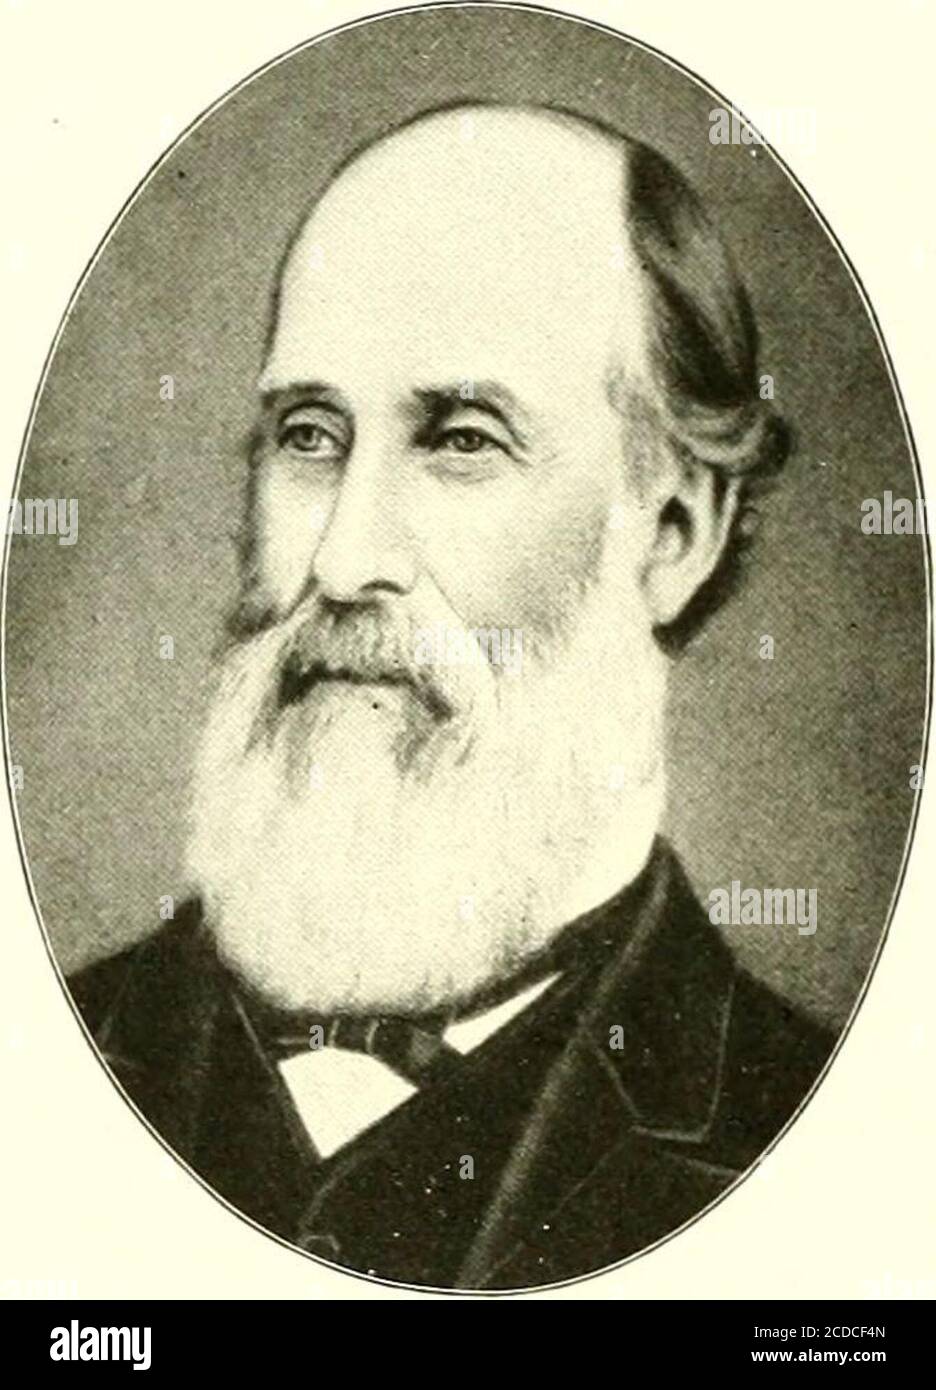 . Historical encyclopedia of Illinois . Grace, liorn April, 1902. ALBION P. CHASE (deceased), physician,son of Mayhew and Anne (Merrill) Chase, wasborn in Livermore, Oxford County, Me., (laterincorporated with Androscoggin County). Feb.18, 1817. His grandfather. Sarson Chase, withbrothers. Captain Thomas Chase (who waswith John Paul Jones in the famous naval en-gagement between the Bon Homme Richard 726 HISTORY OF LEE COUNTY and the Serapis). and Captain Tristram Chase(who was lost at sea in 18UU), shipmasters,came to Livermore from Tisbury, MarthasVineyard, before Maine was separated fromMass Stock Photo